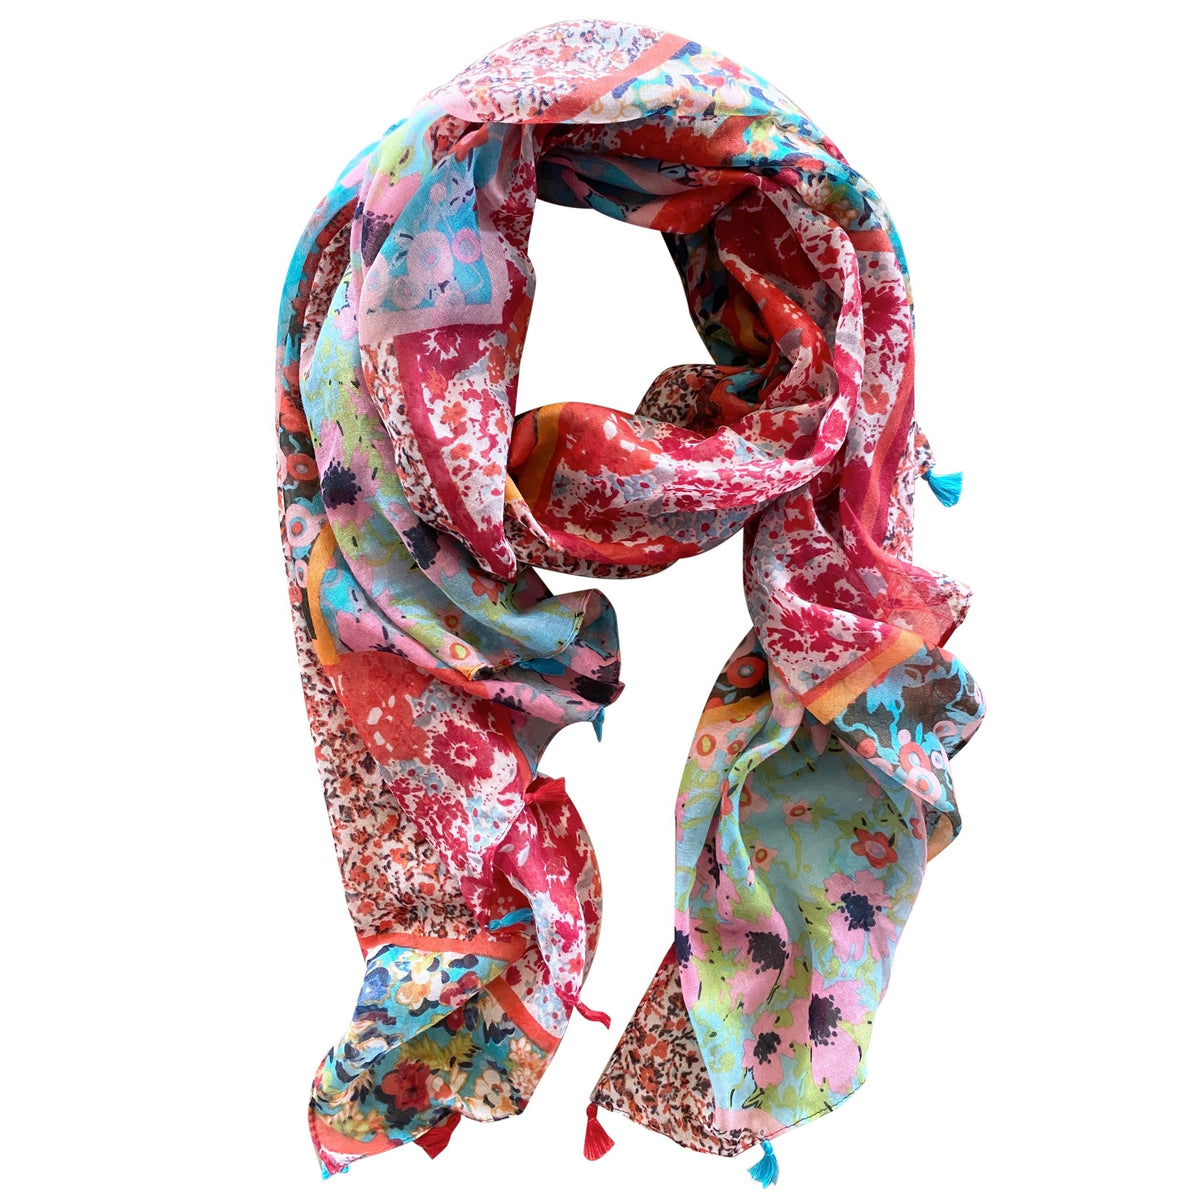 Add elegance with our unique floral and mosaic patterned scarf, adorned with red and blue tassels. Soft, lightweight, and comfortable for all-day wear. All scarves are a polyester blend.